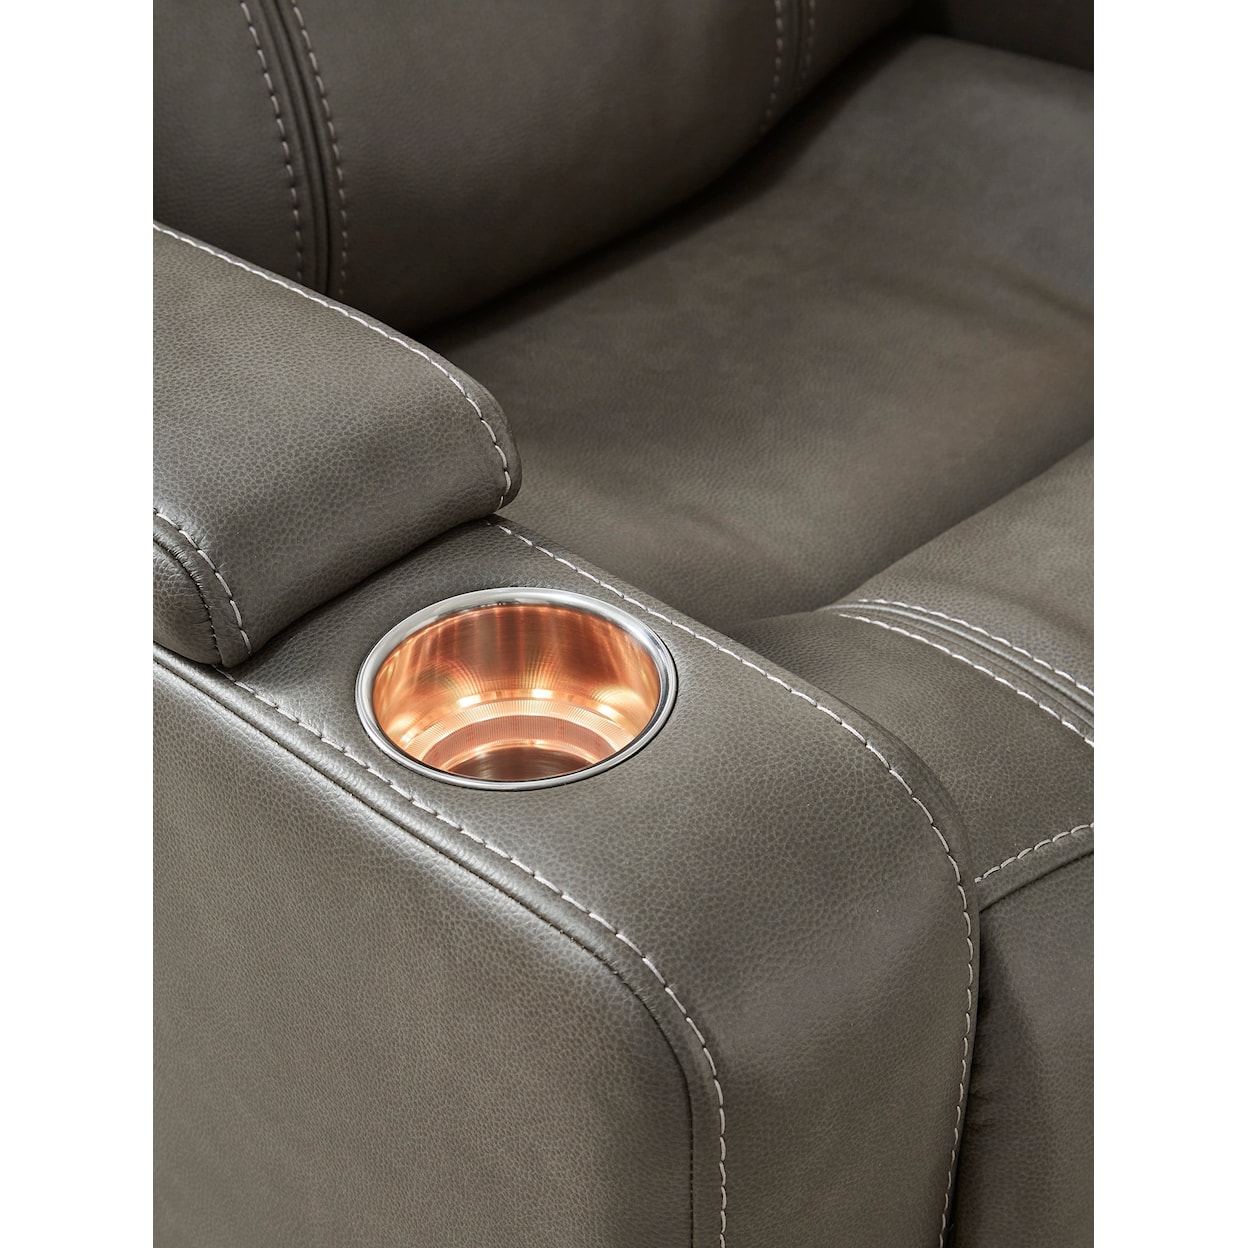 Signature Design by Ashley Crenshaw Power Recliner